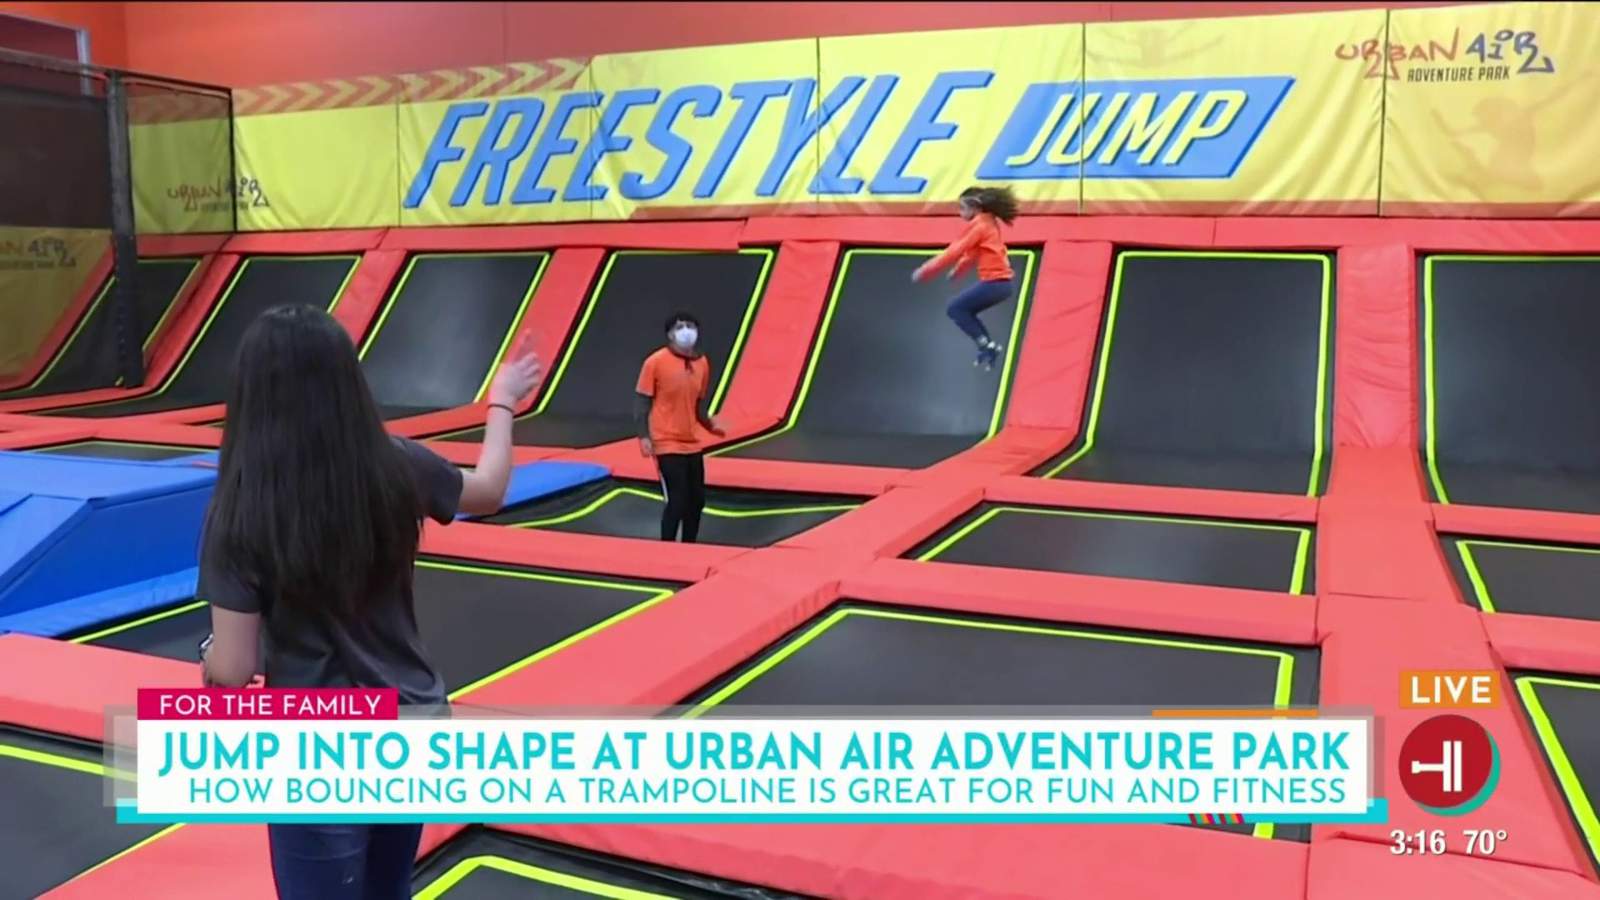 Bounce your way into fitness at Urban Air Adventure Park